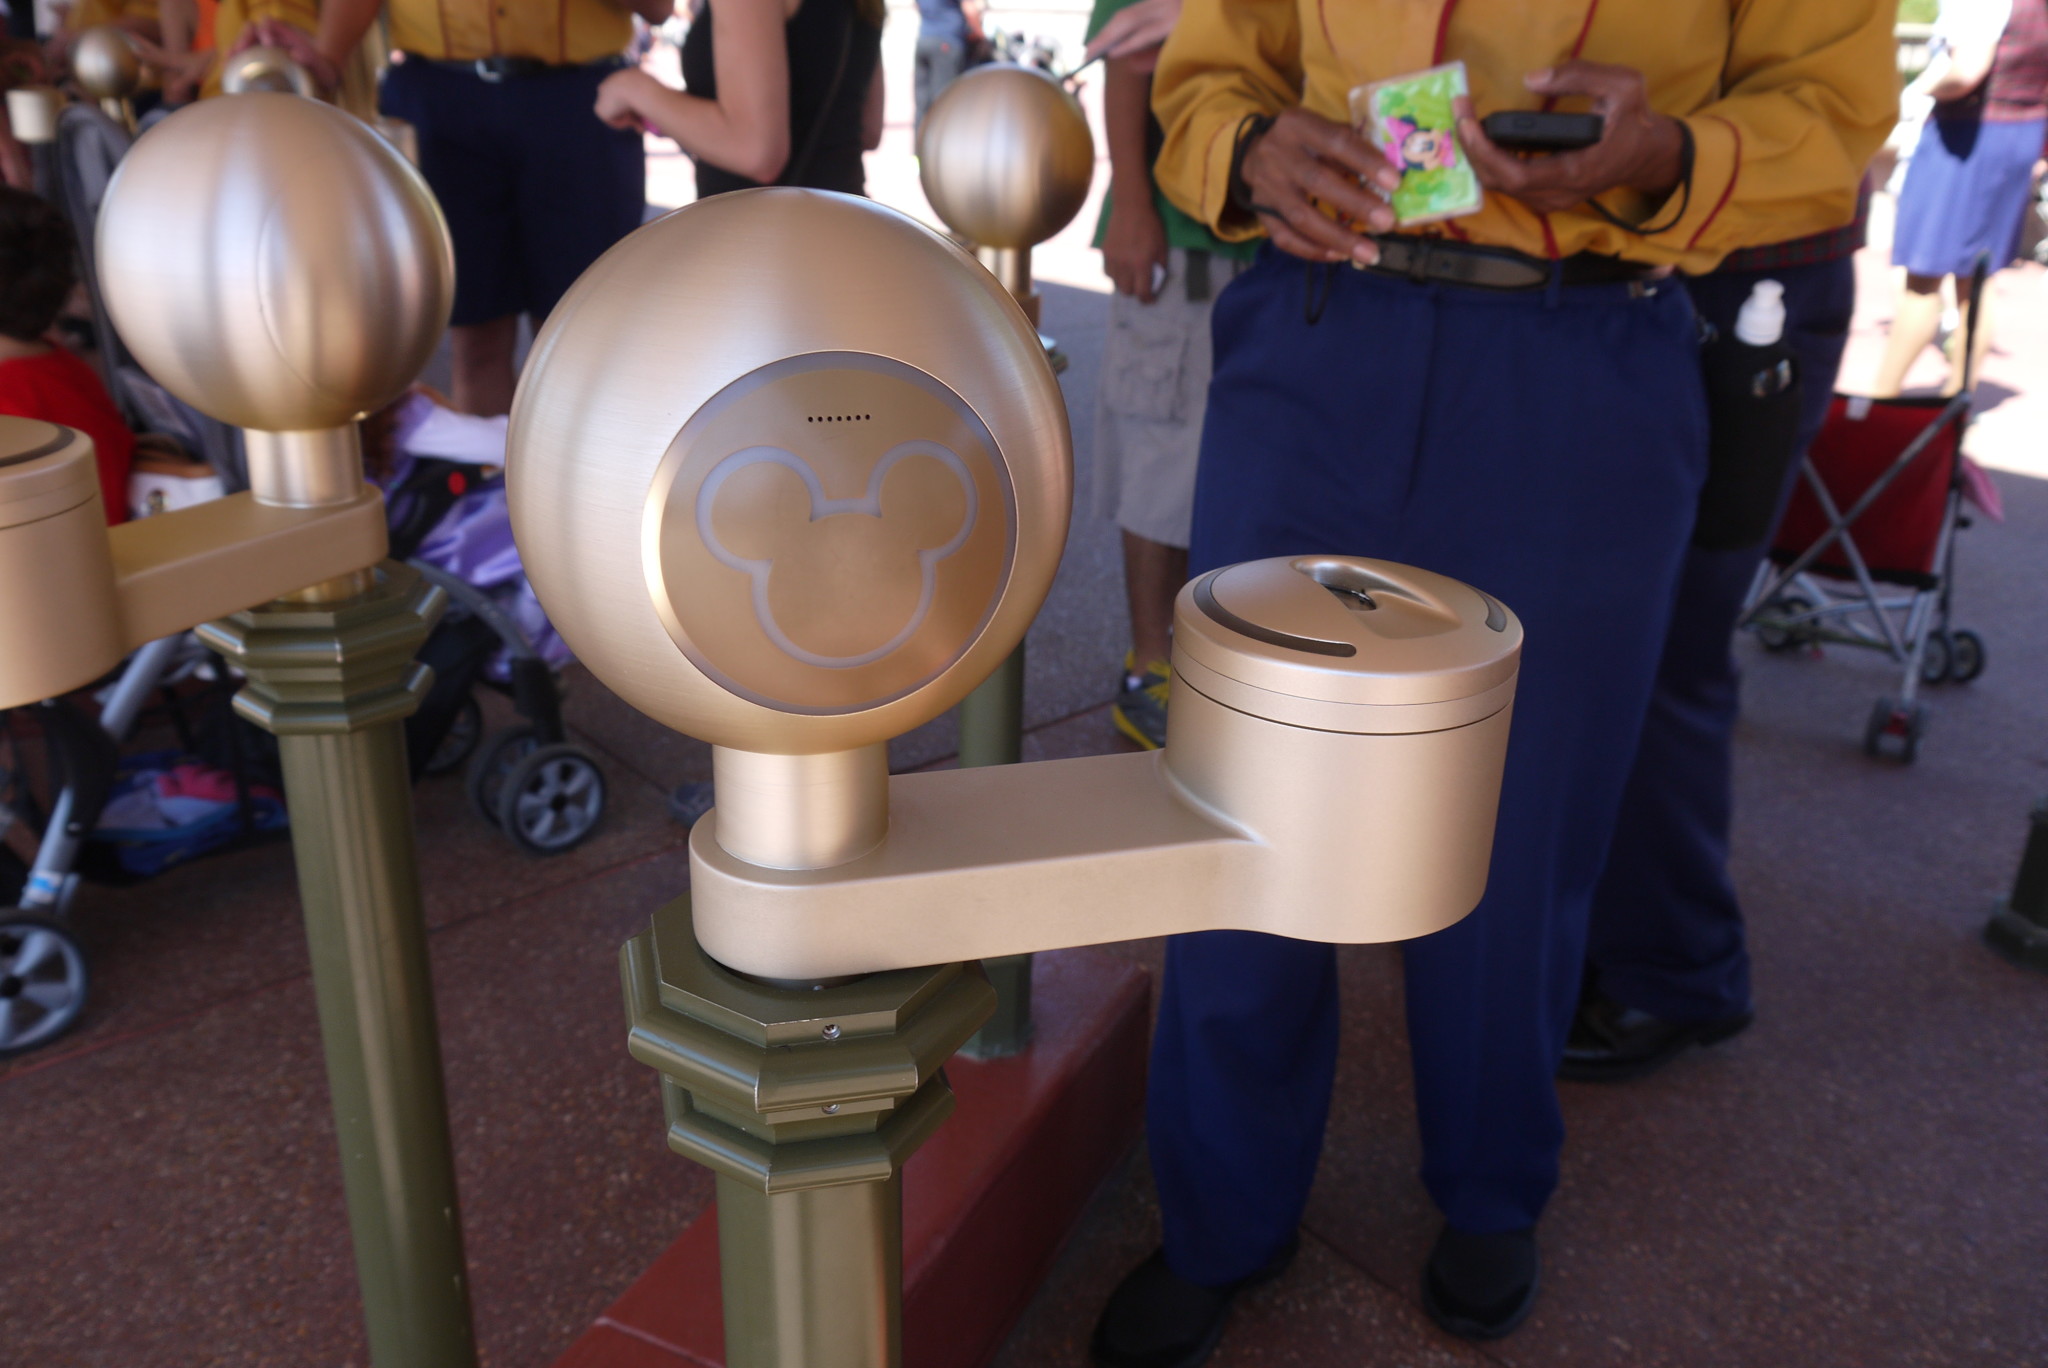 Disney World to Introduce I.D. for Guests That Have Problems with Fingerprint Entry